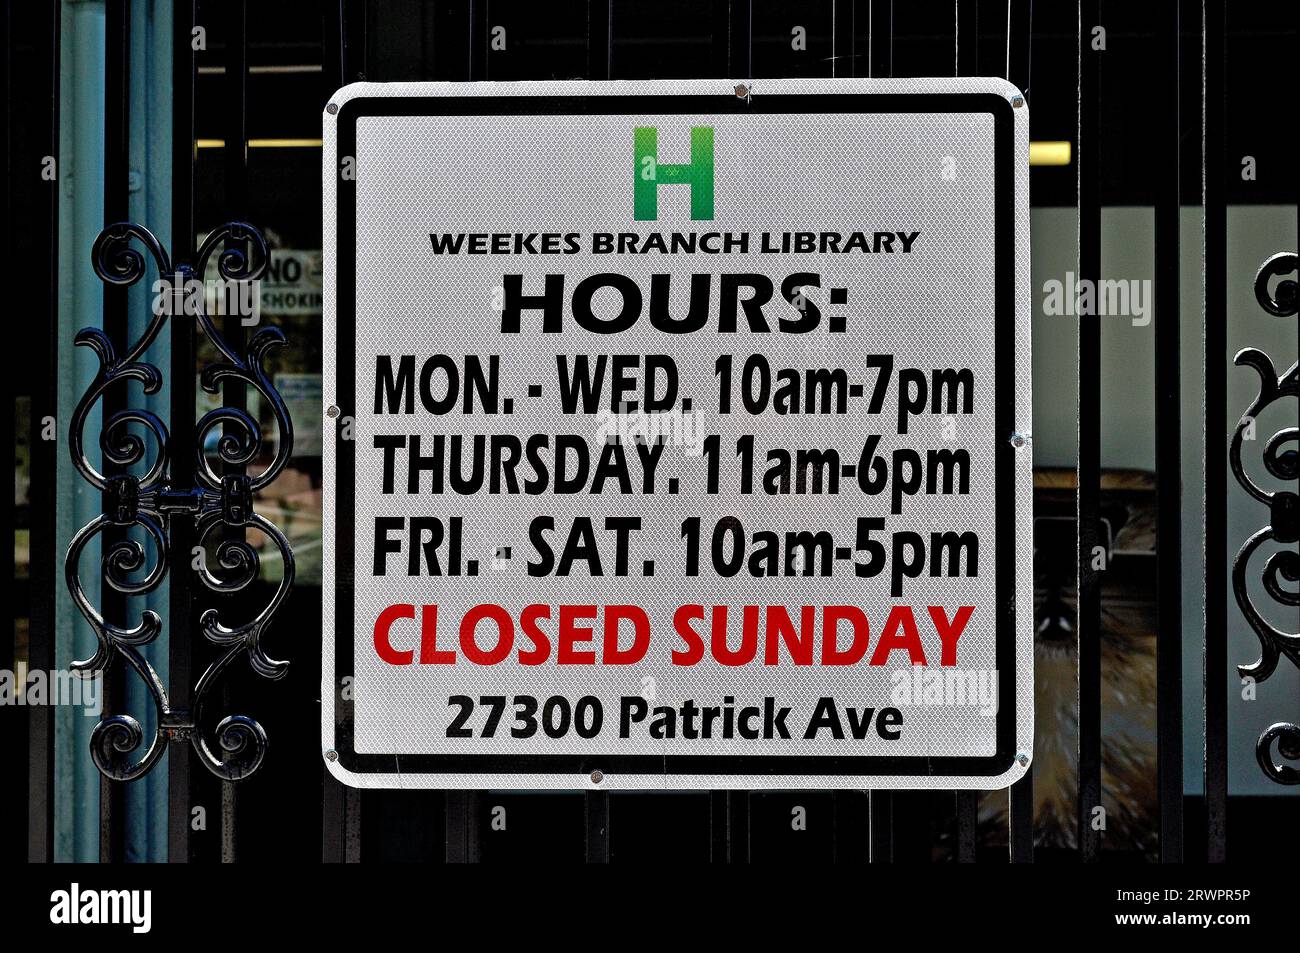 Weekes Library Branch's hours Sign in Hayward California Stockfoto